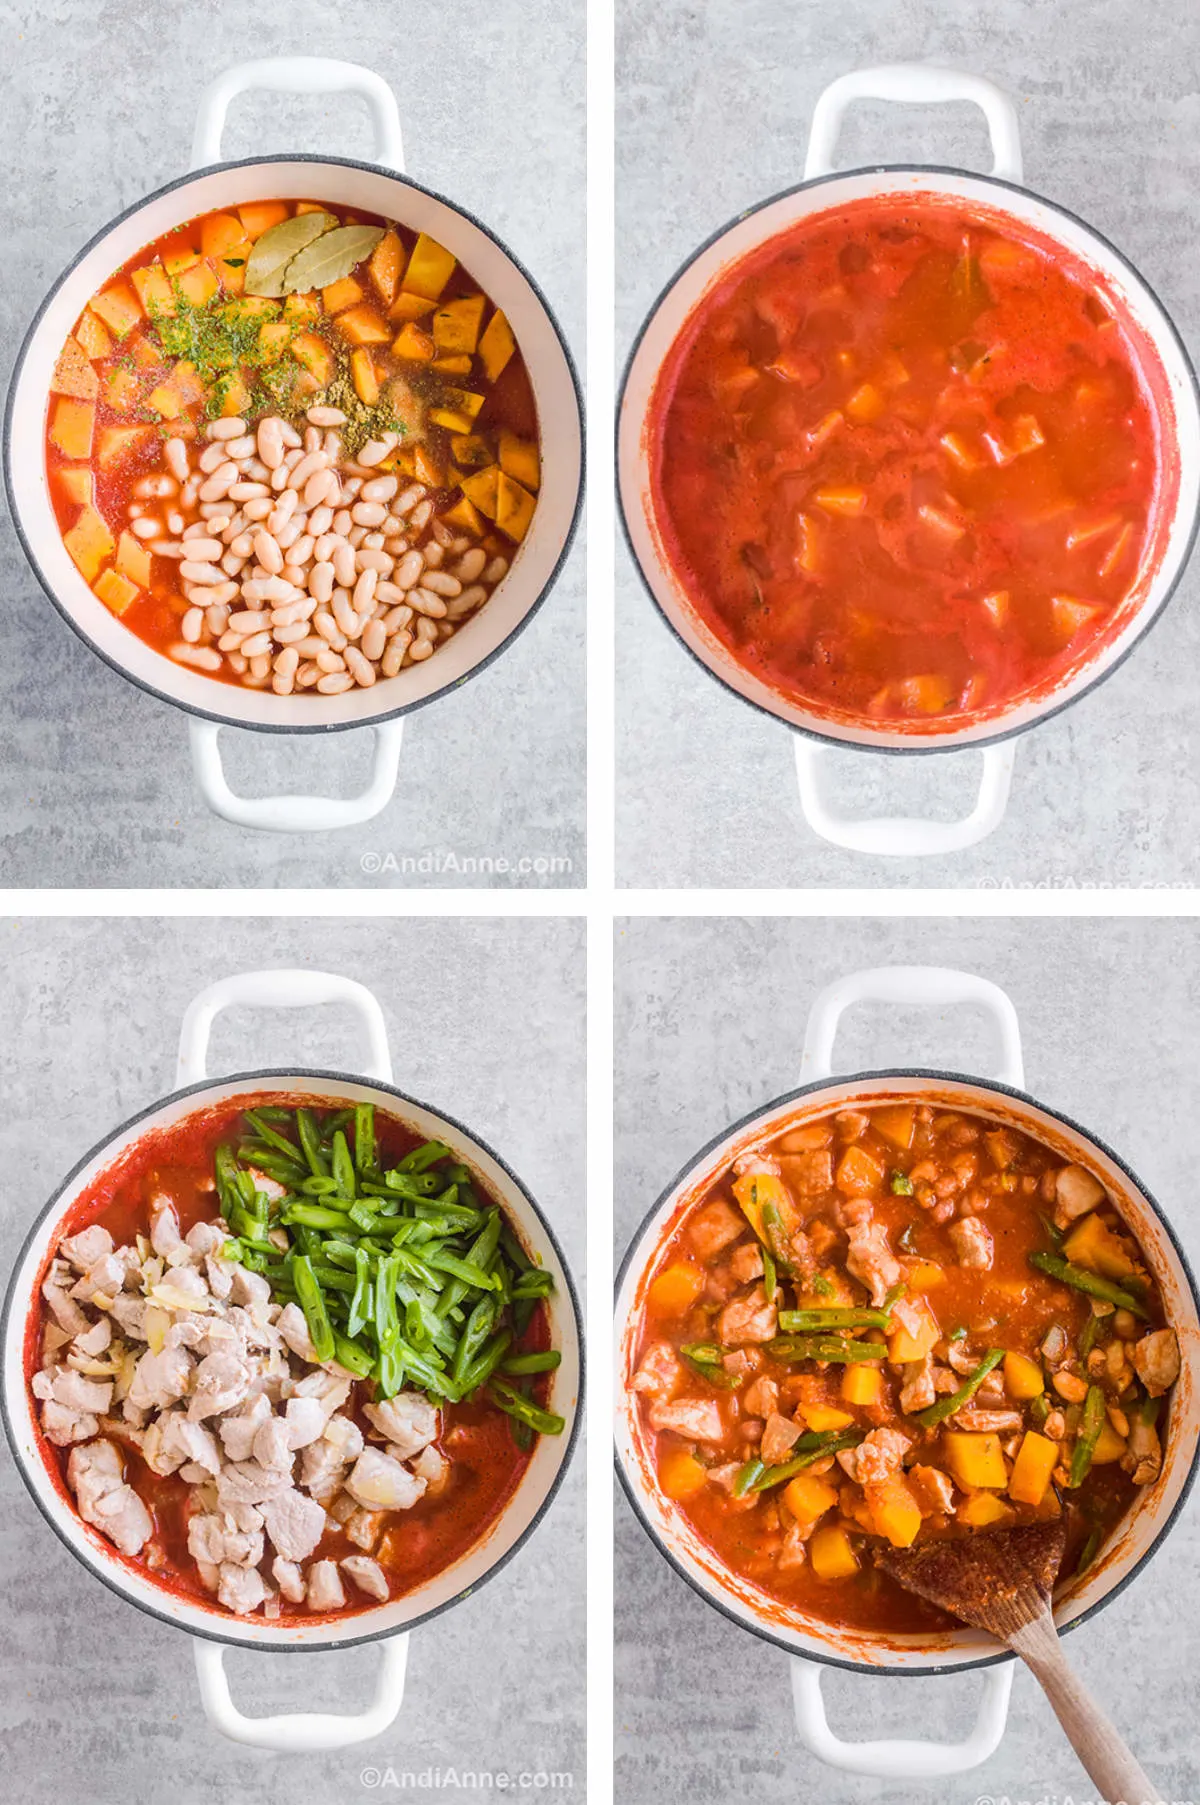 Four overhead images in one: 1. All ingredients minus pork and green beans are added to pot. 2. Ingredients are mixed. 3. Pork and green beans are added. 4. All ingredients are mixed. 